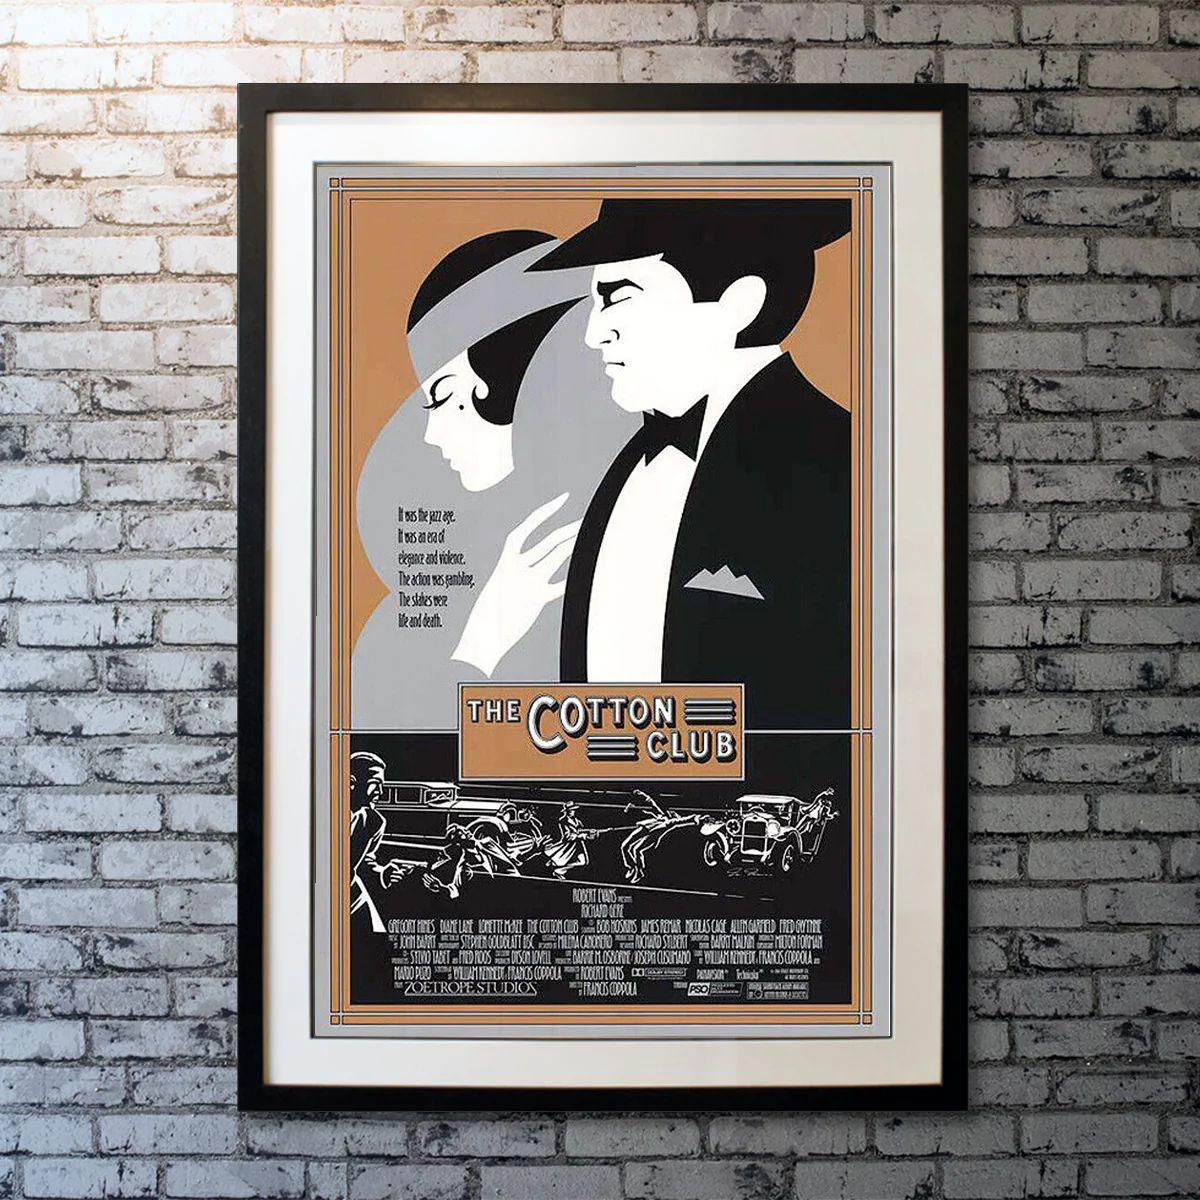 The Cotton Club, Unframed Poster, 1984

Original US One Sheet (26 X 40 Inches). Meet the jazz musicians, dancers, owner, and guests (like gangster Dutch Schultz) of The Cotton Club in 1928-1930s Harlem.

Year: 1984
Nationality: United